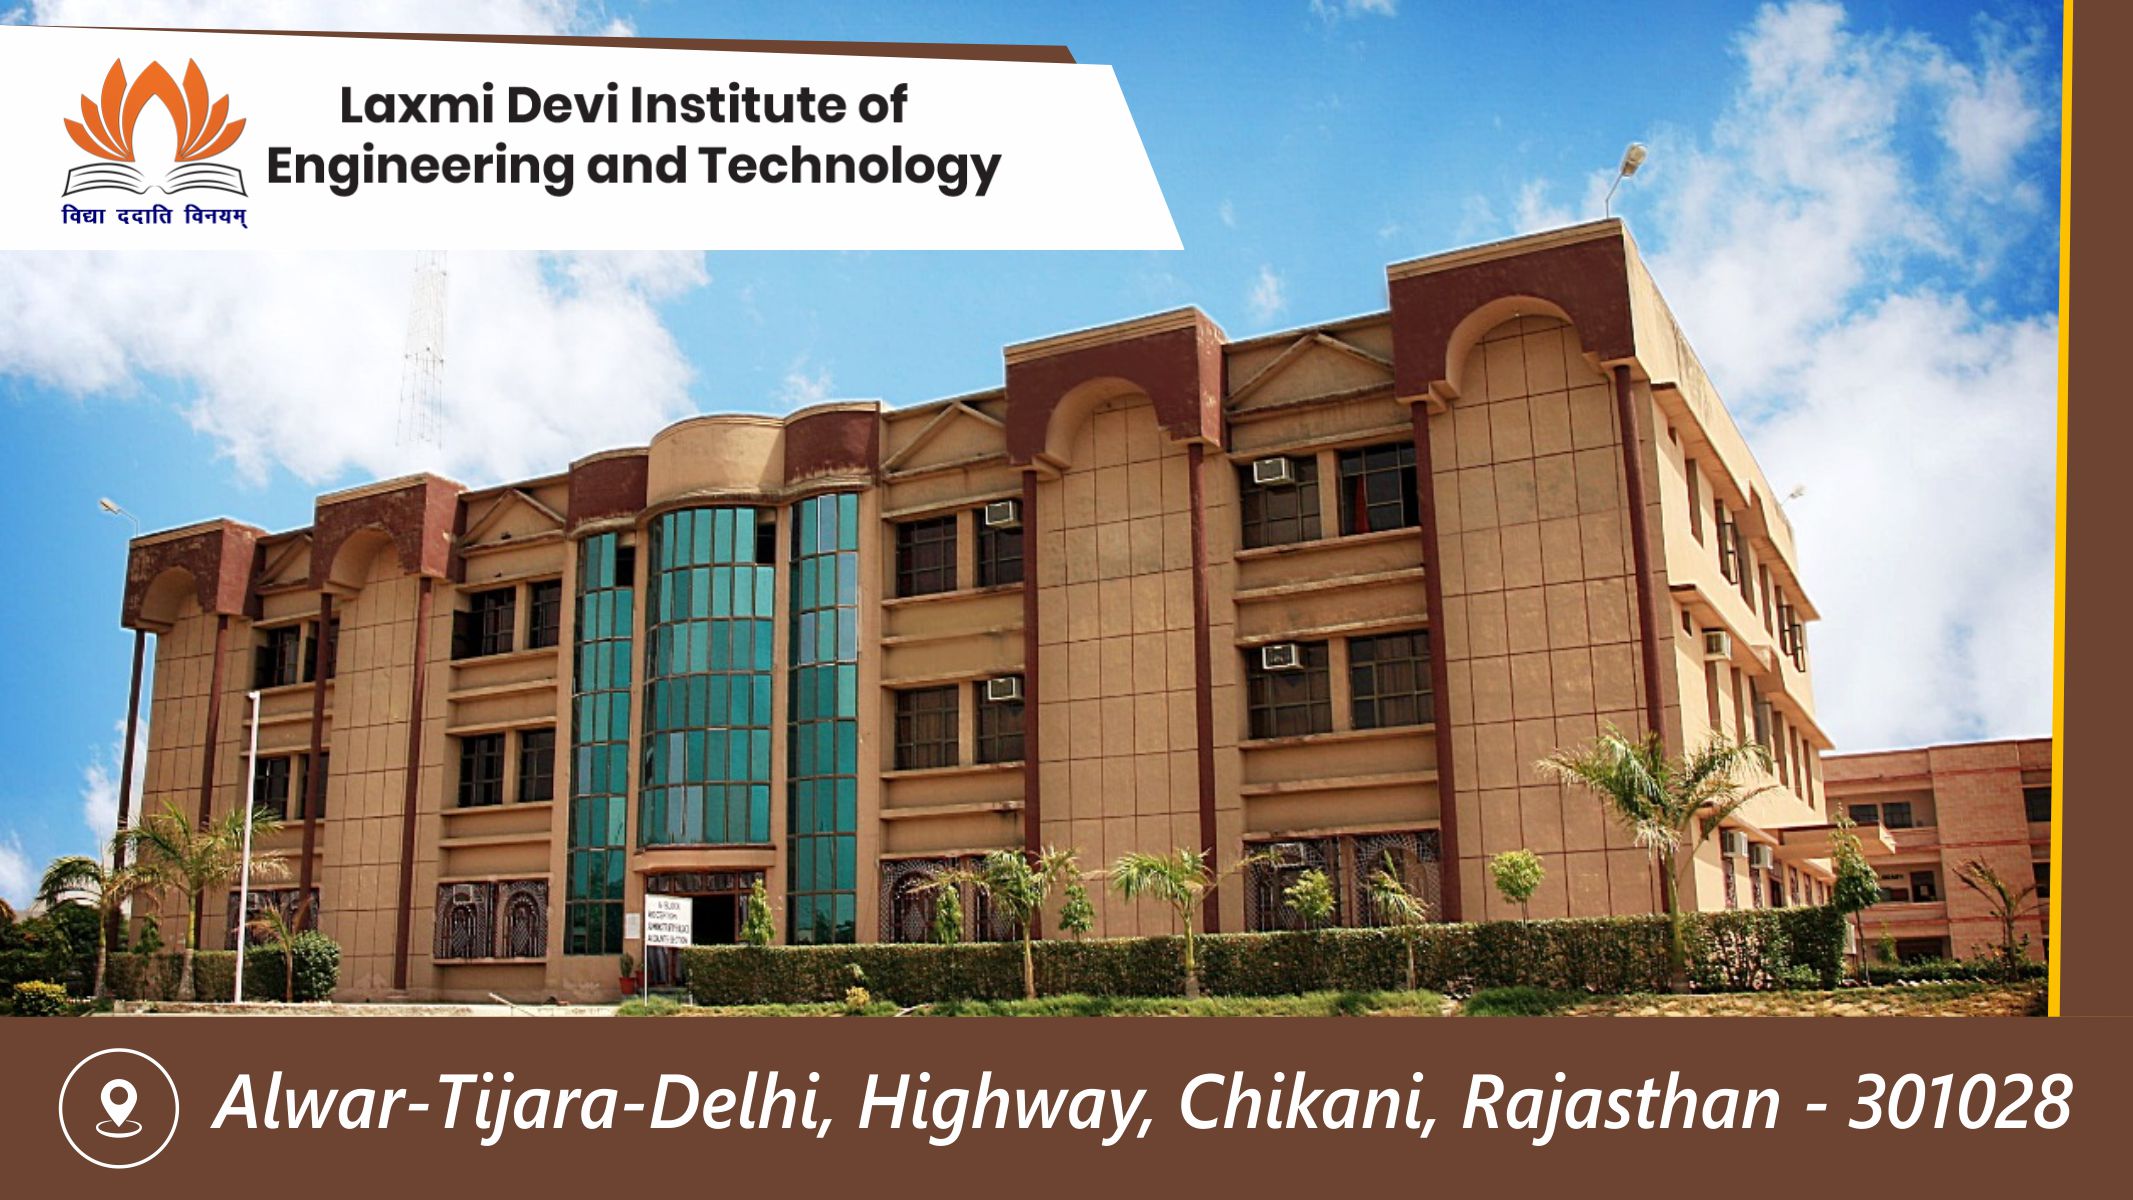 Out Side View of  Laxmi Devi Institute of Engineering and Technology